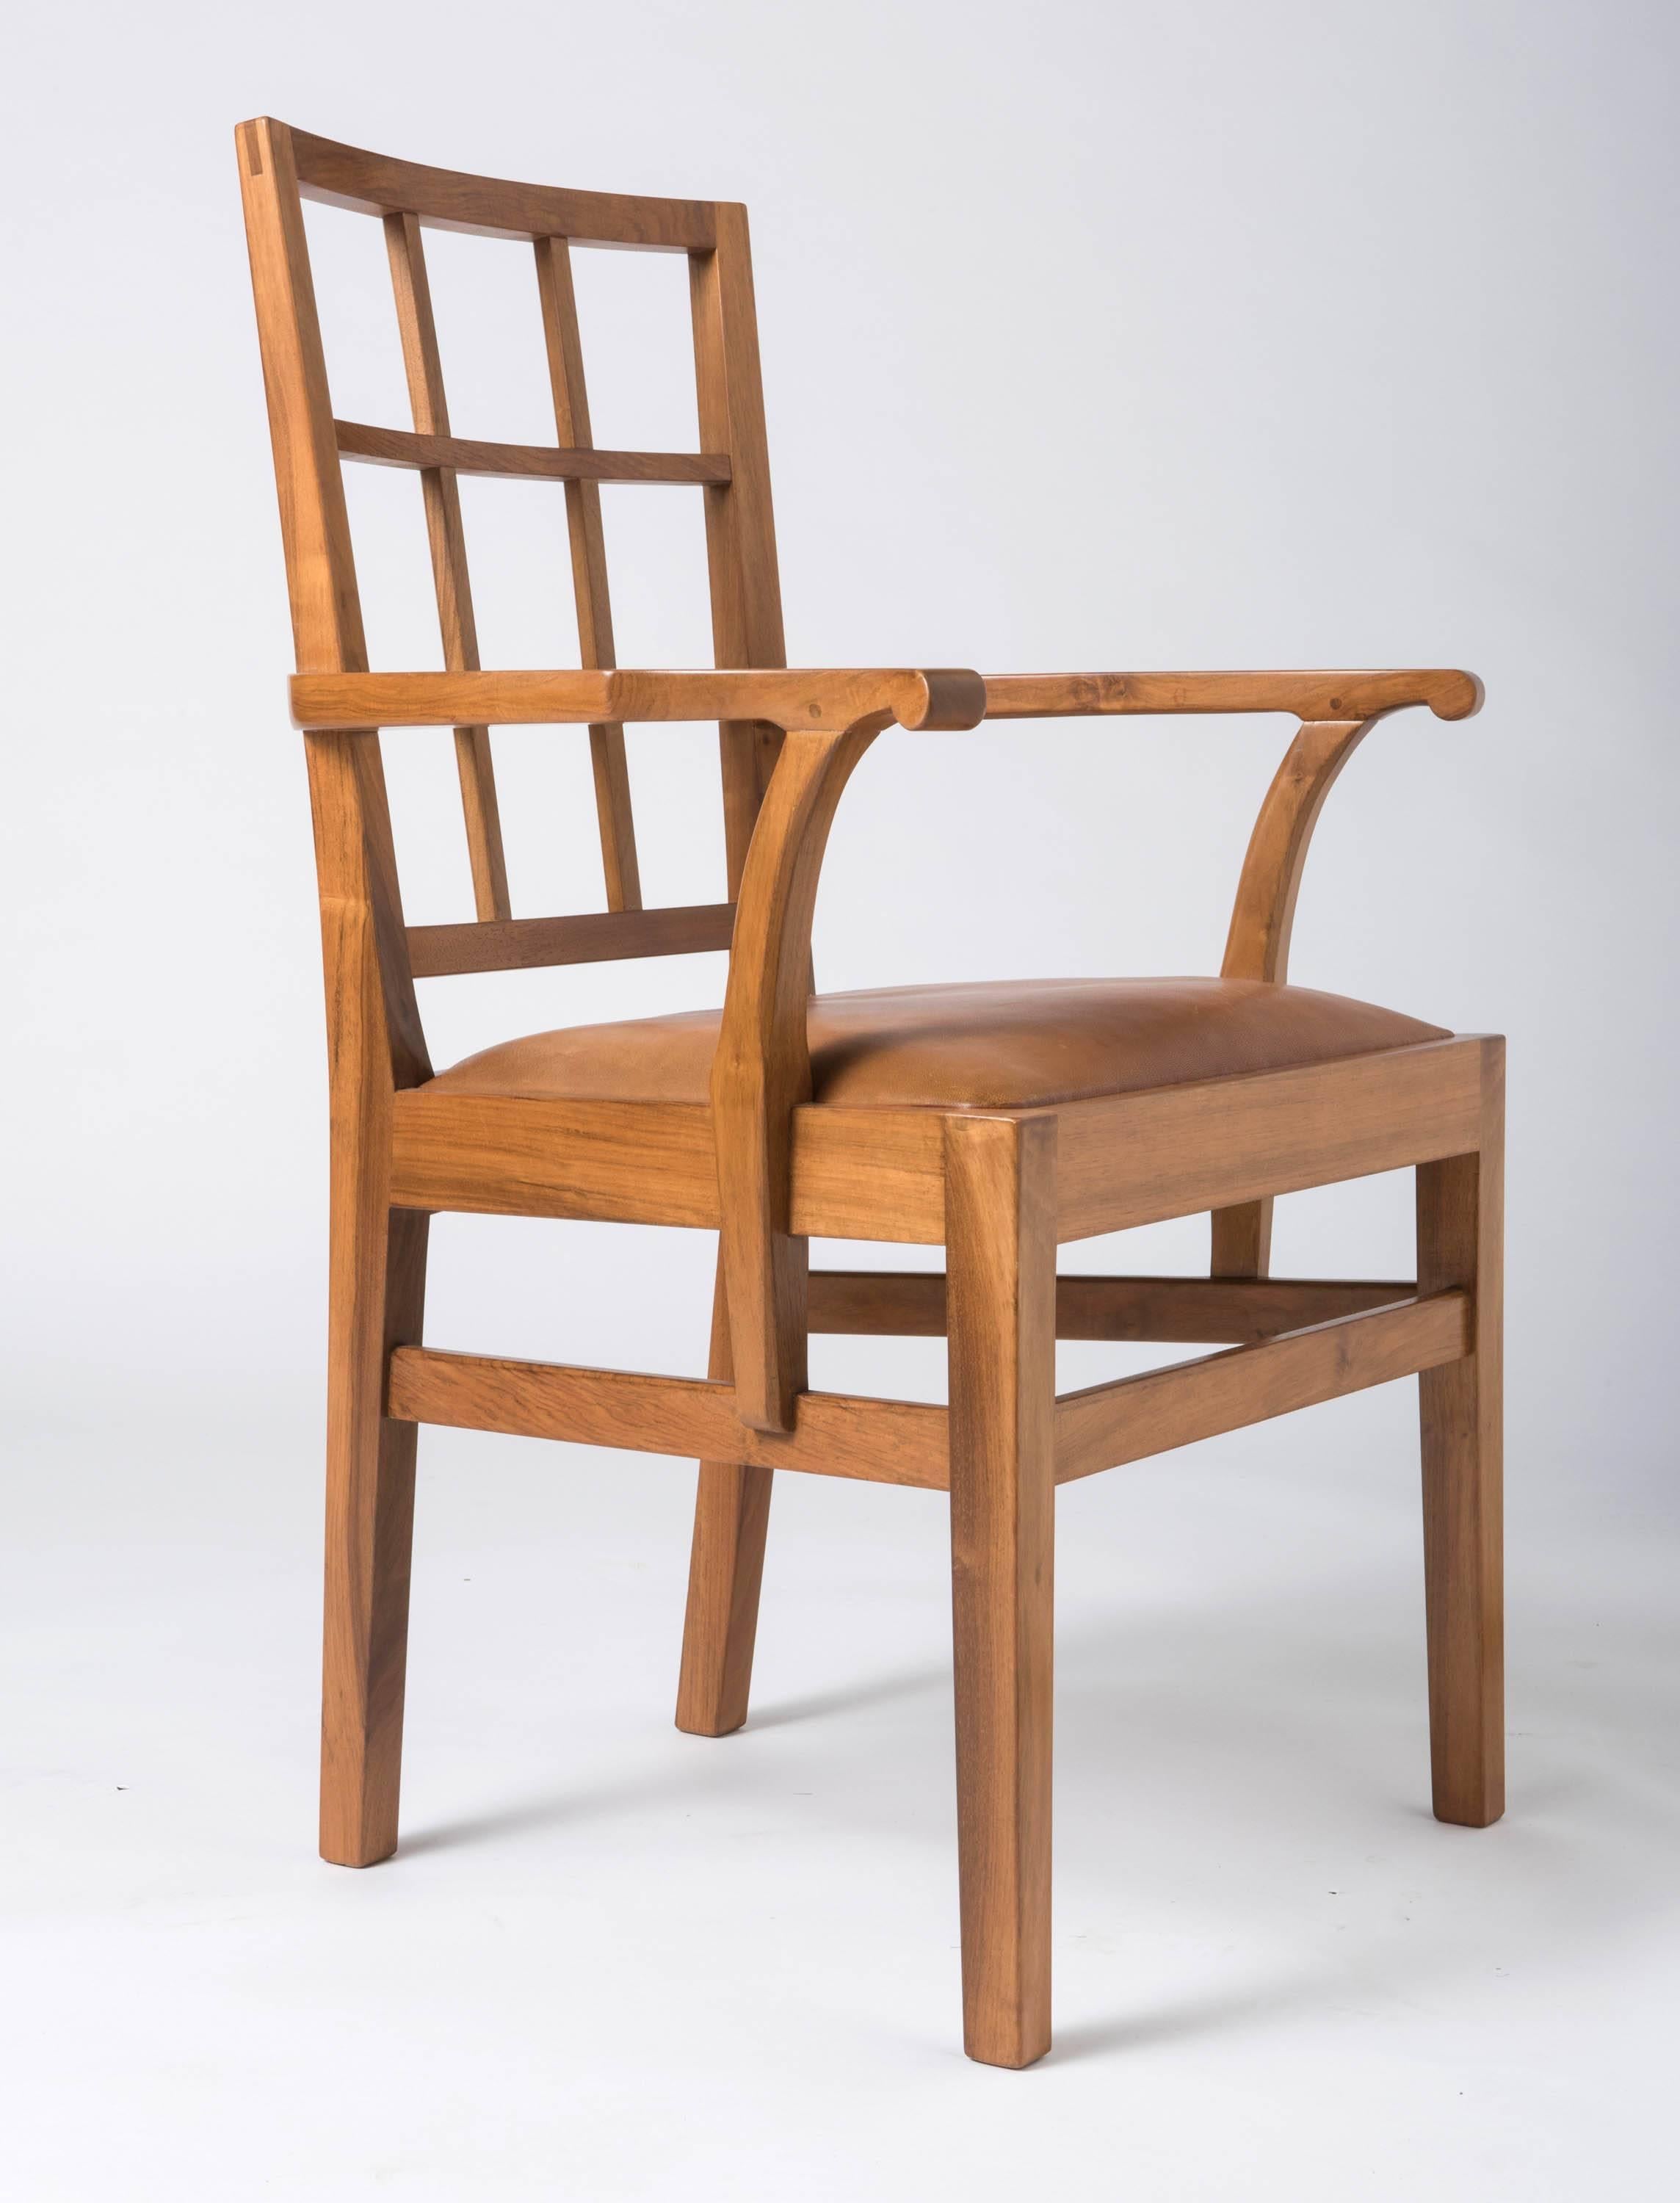 A rare set of eight walnut dining chairs by Edward Barnsley.
Lattice back
Six chairs and two carvers.
England, circa 1947.
Chairs : 88 cm high x 46 cm wide x 42 cm deep and seat height 48 cm.
Carvers : 92 cm high x 59 cm wide x 46 cm deep and seat